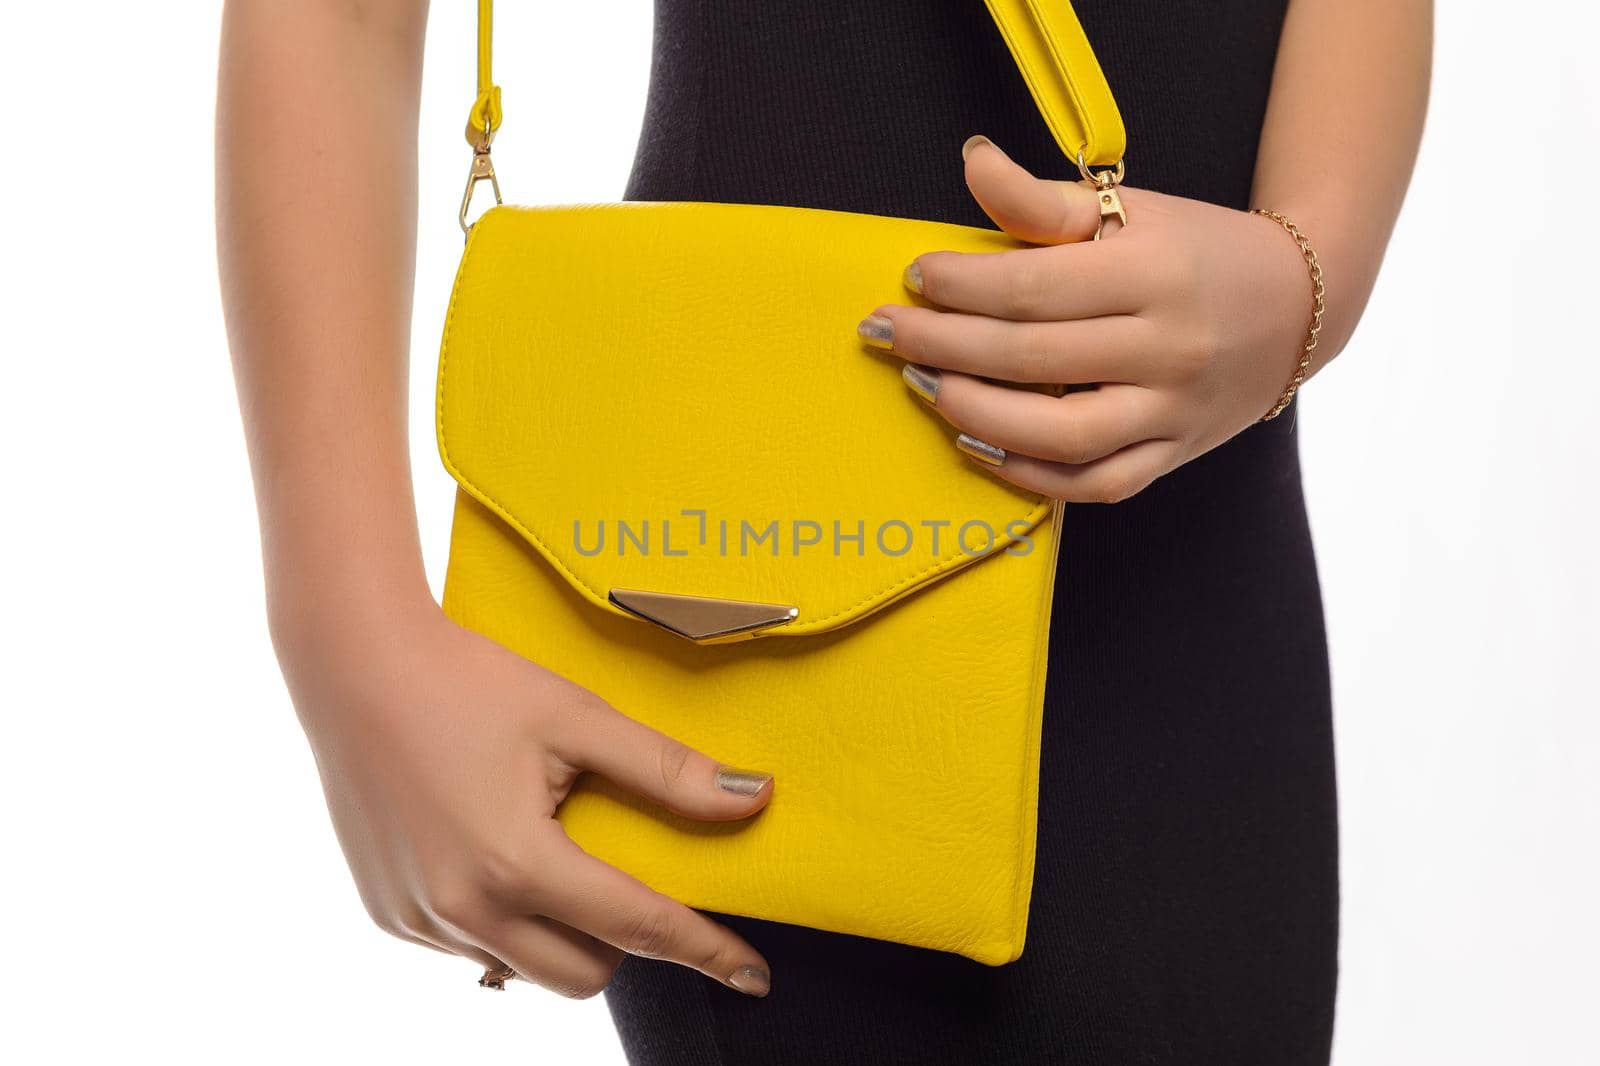 The fashionable young woman holding yellow handbag white background.